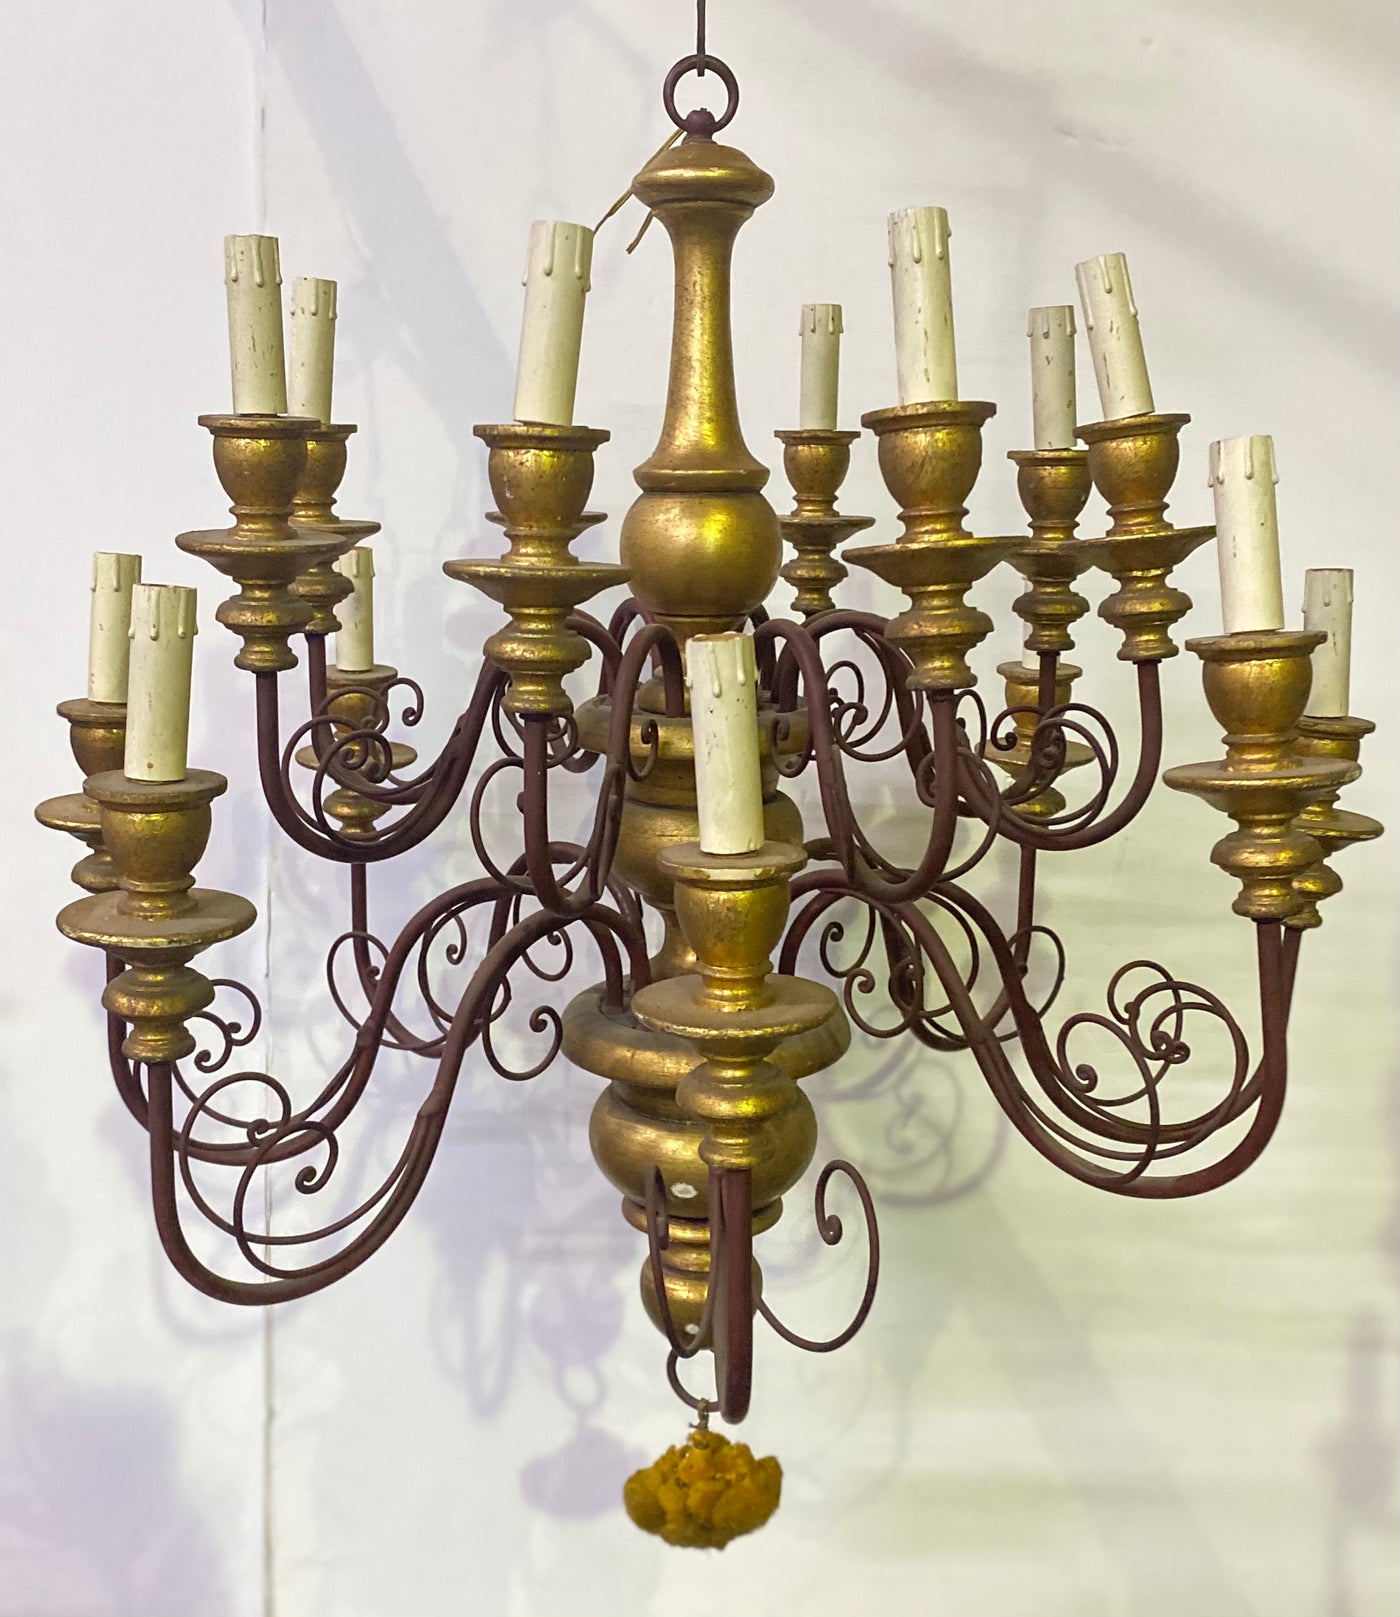 16 Arm Wood and Iron Chandelier